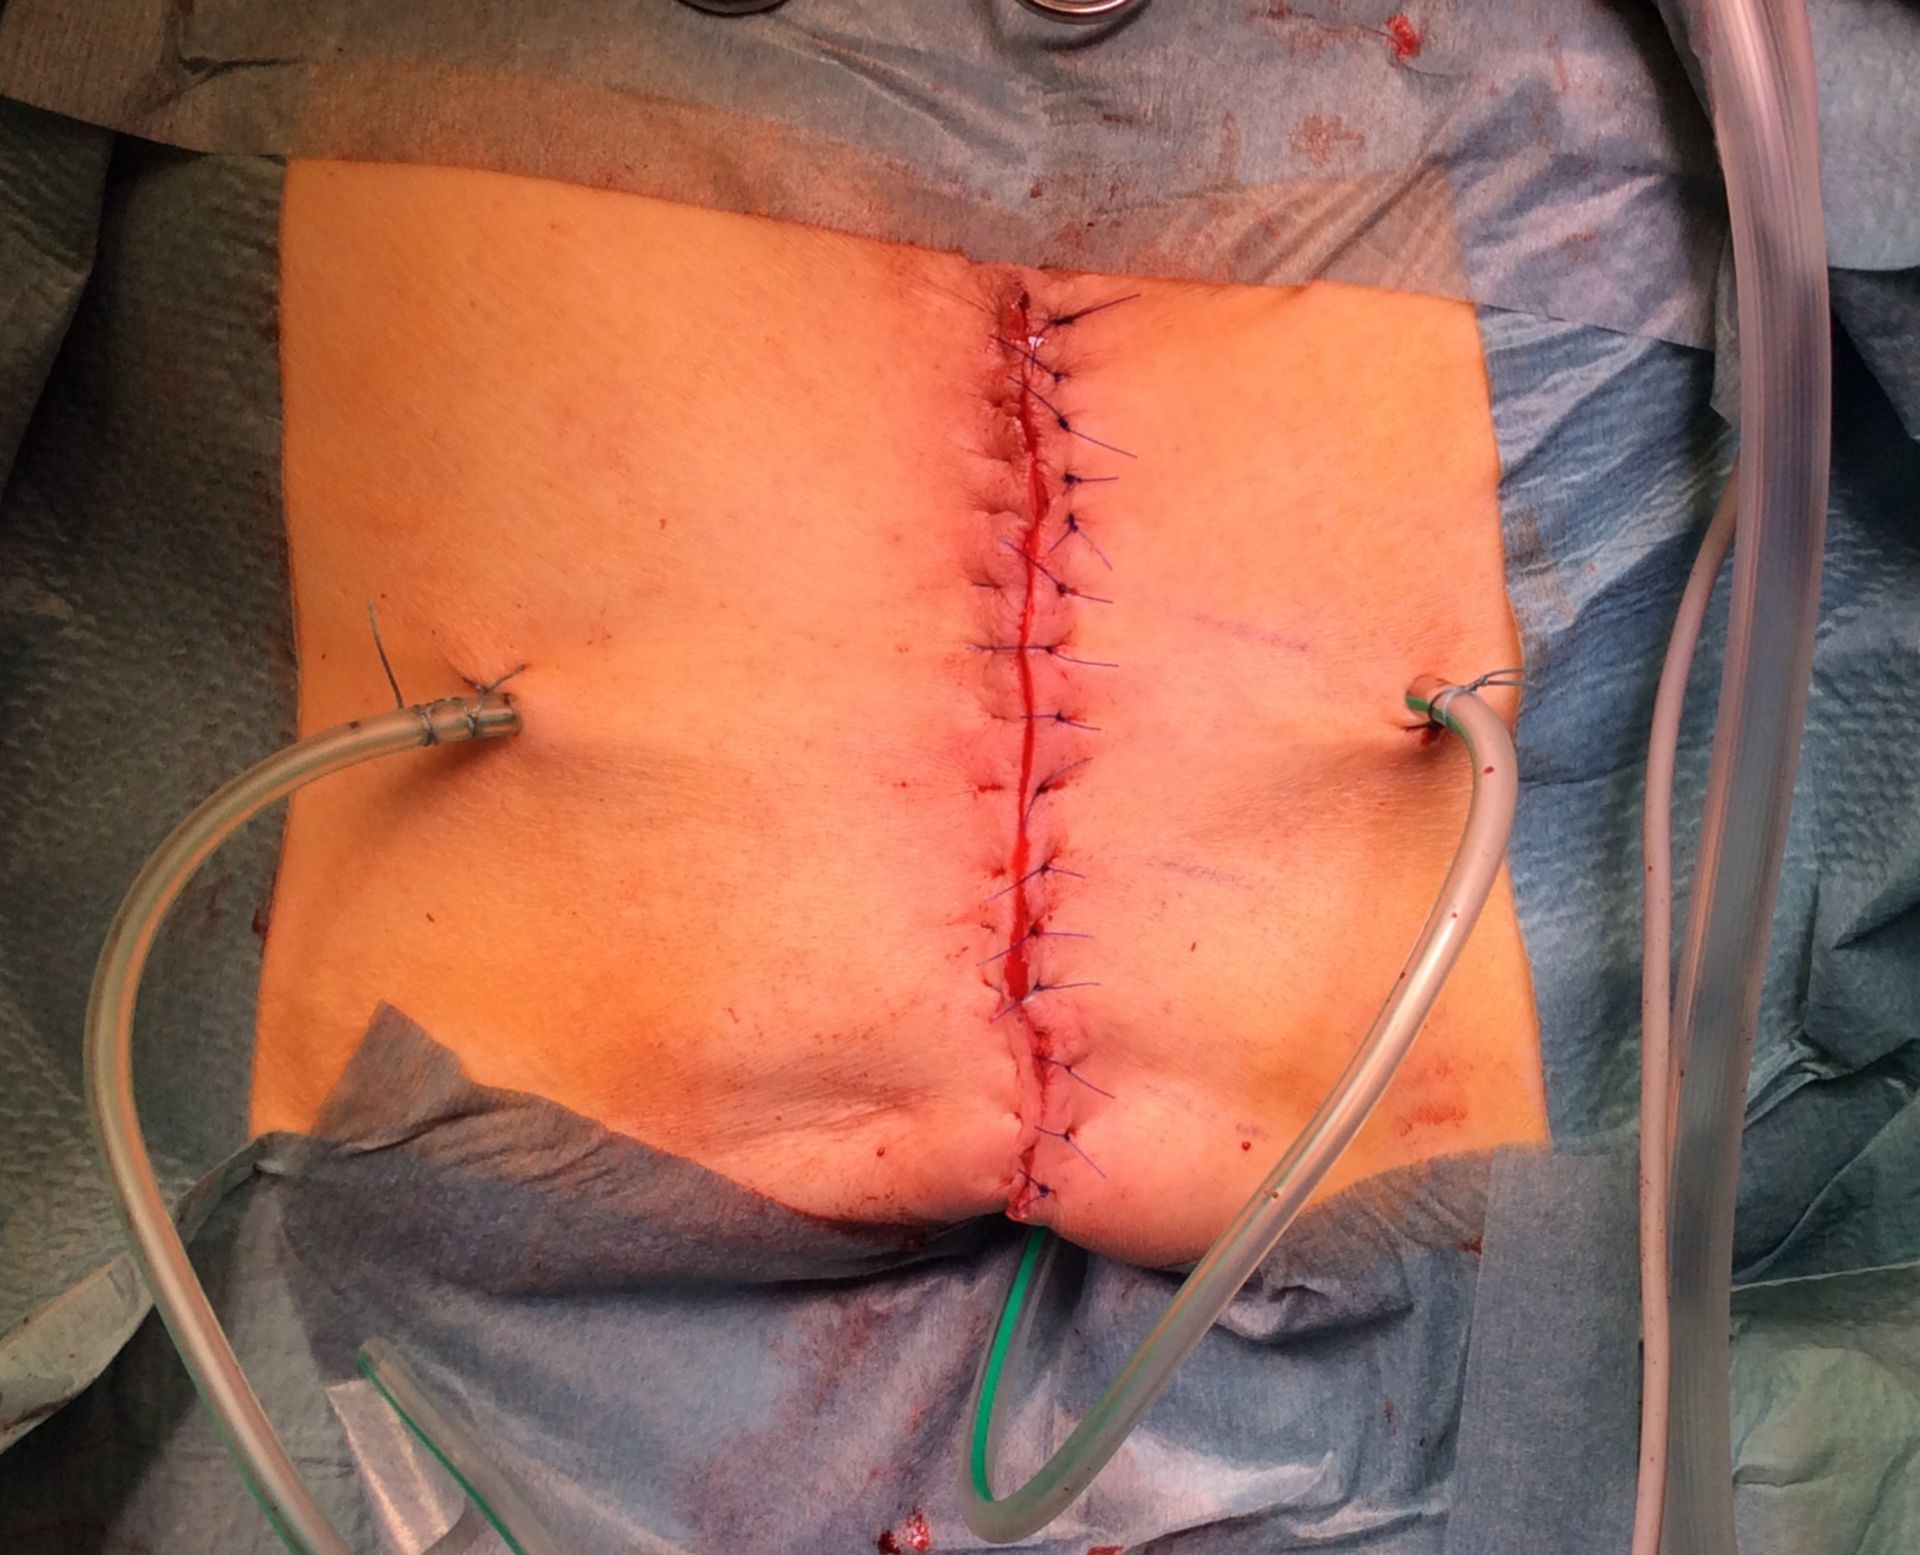 Sacral hernia after rectal extirpation – situs after closure of the skin